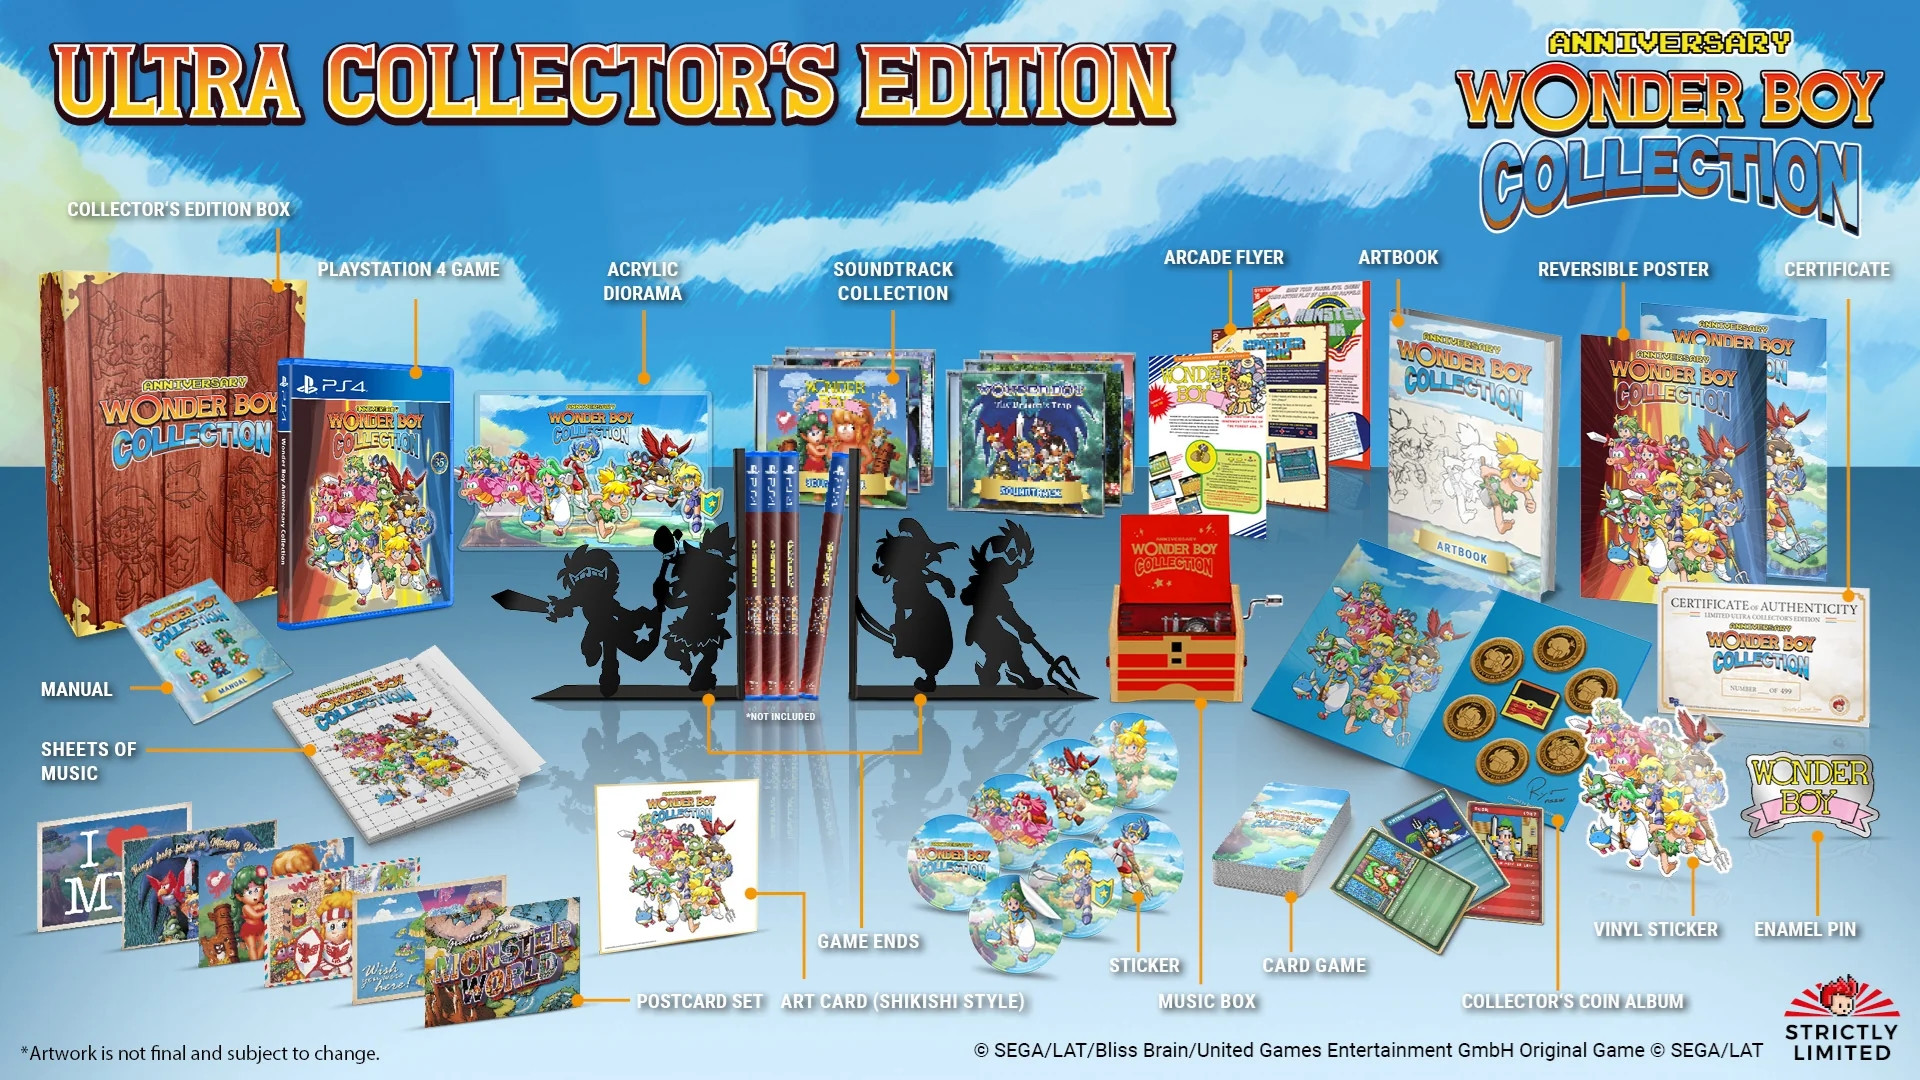 Wonder Boy: Anniversary Collection - Ultra Collector's Edition (Strictly Limited) (PS4), ININ Games, Strictly Limited Gamed